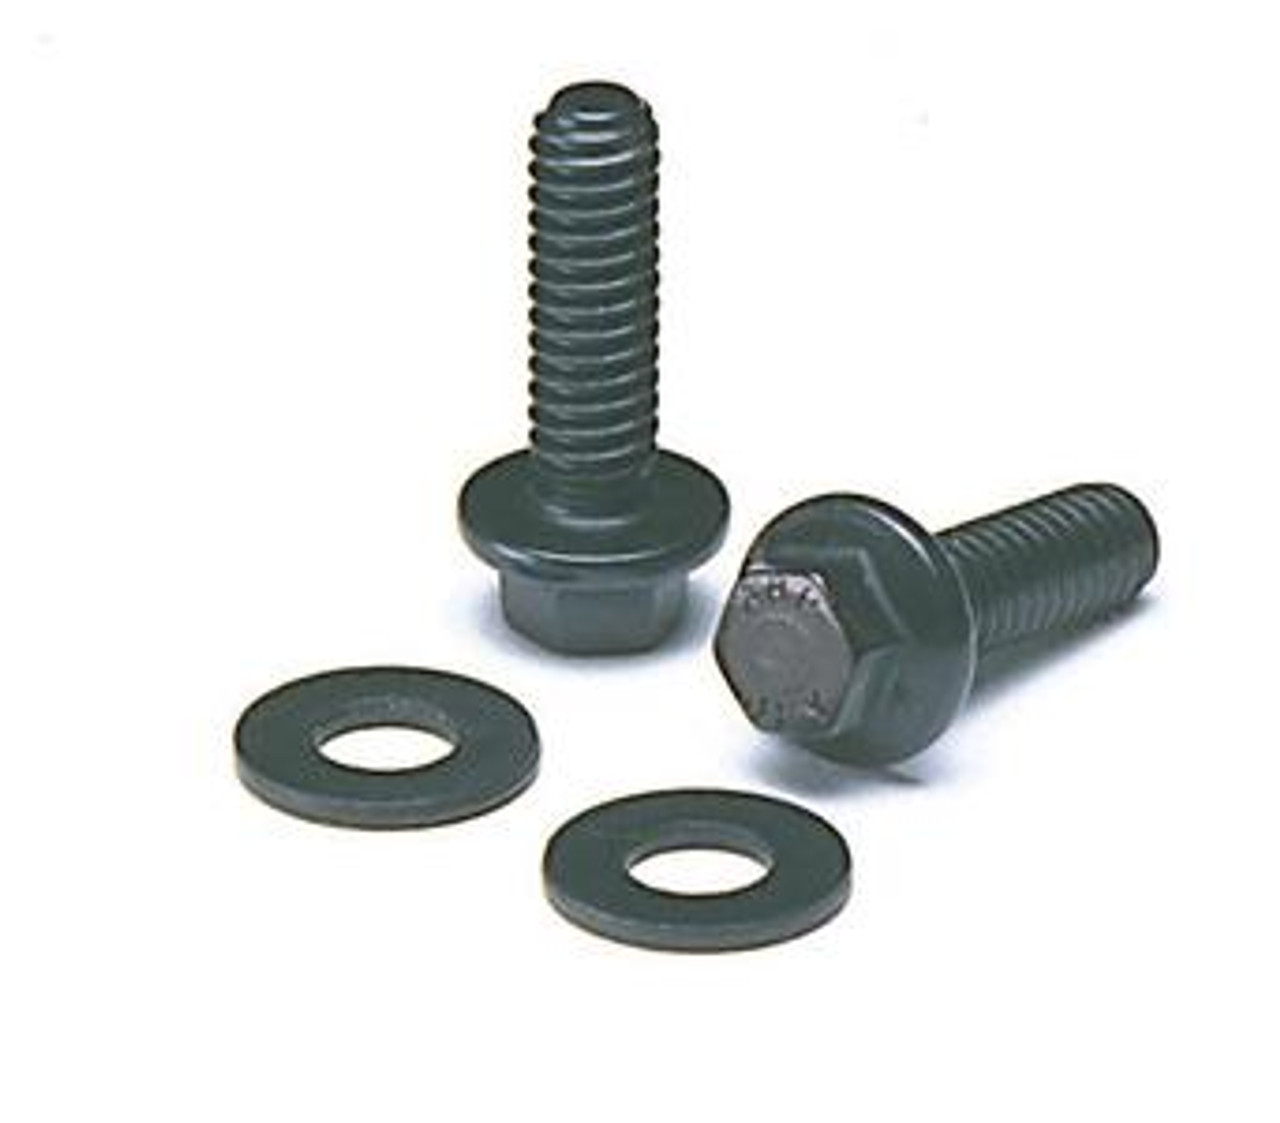 Valve Cover Bolt Kit For Stamped Steel Cover Hex Head 8Pieces 100-7509